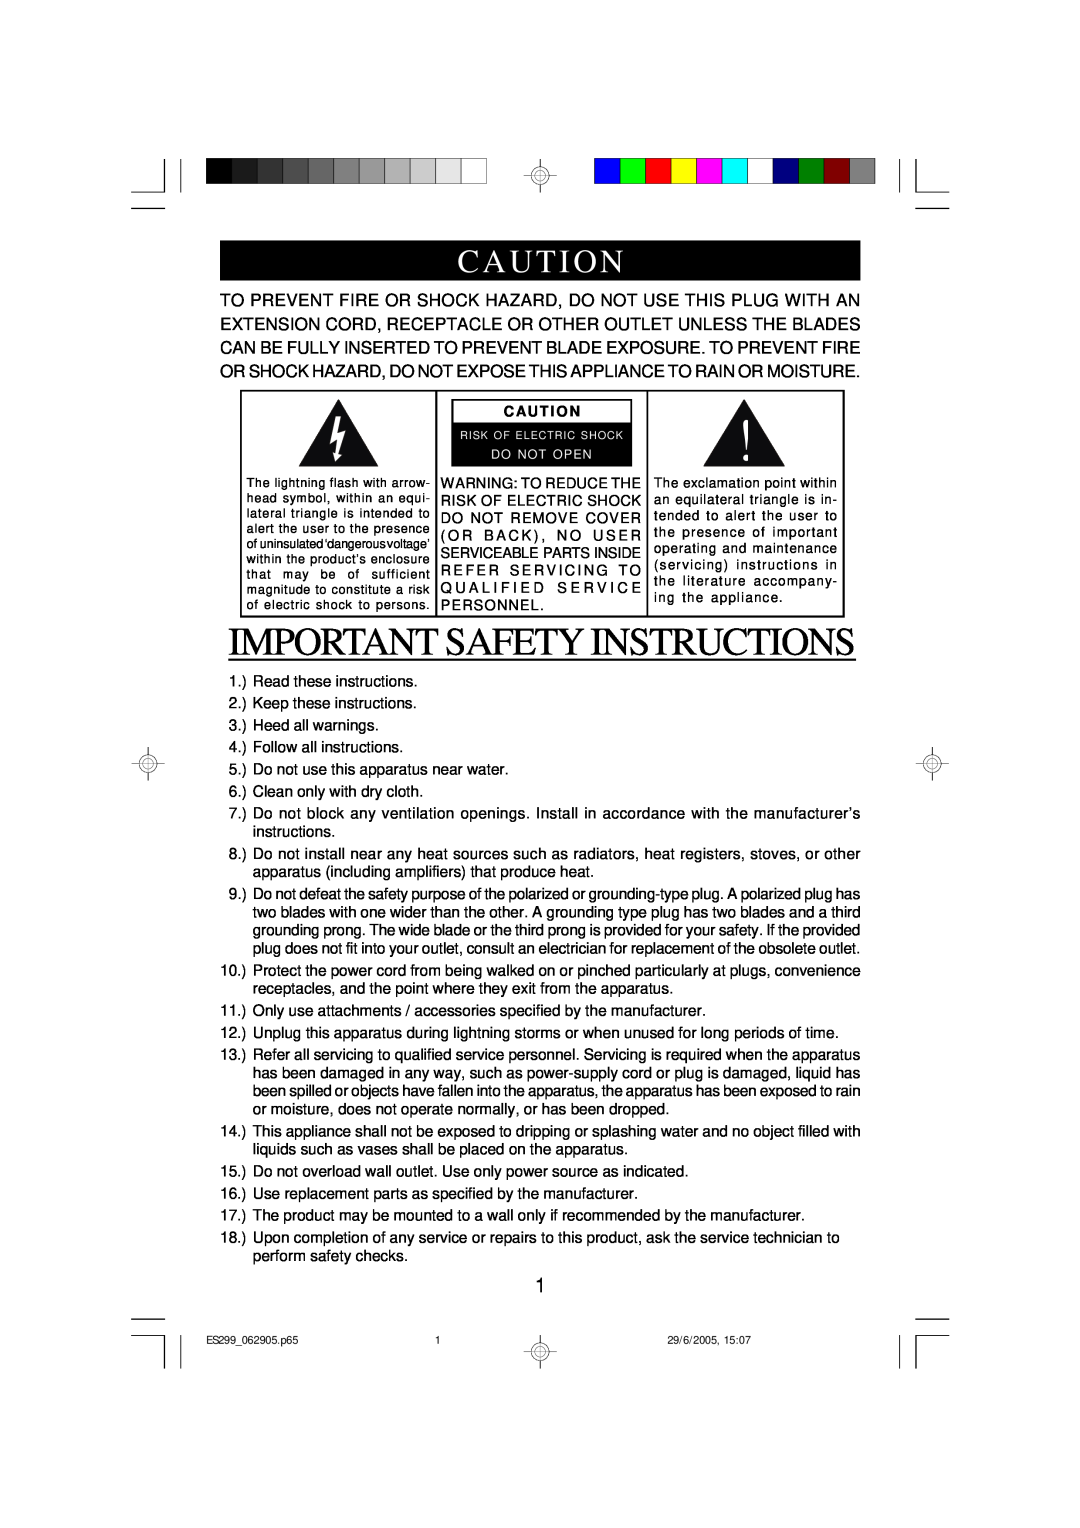 Emerson ES299 owner manual Important Safety Instructions, Caut I On, Caut I O N 